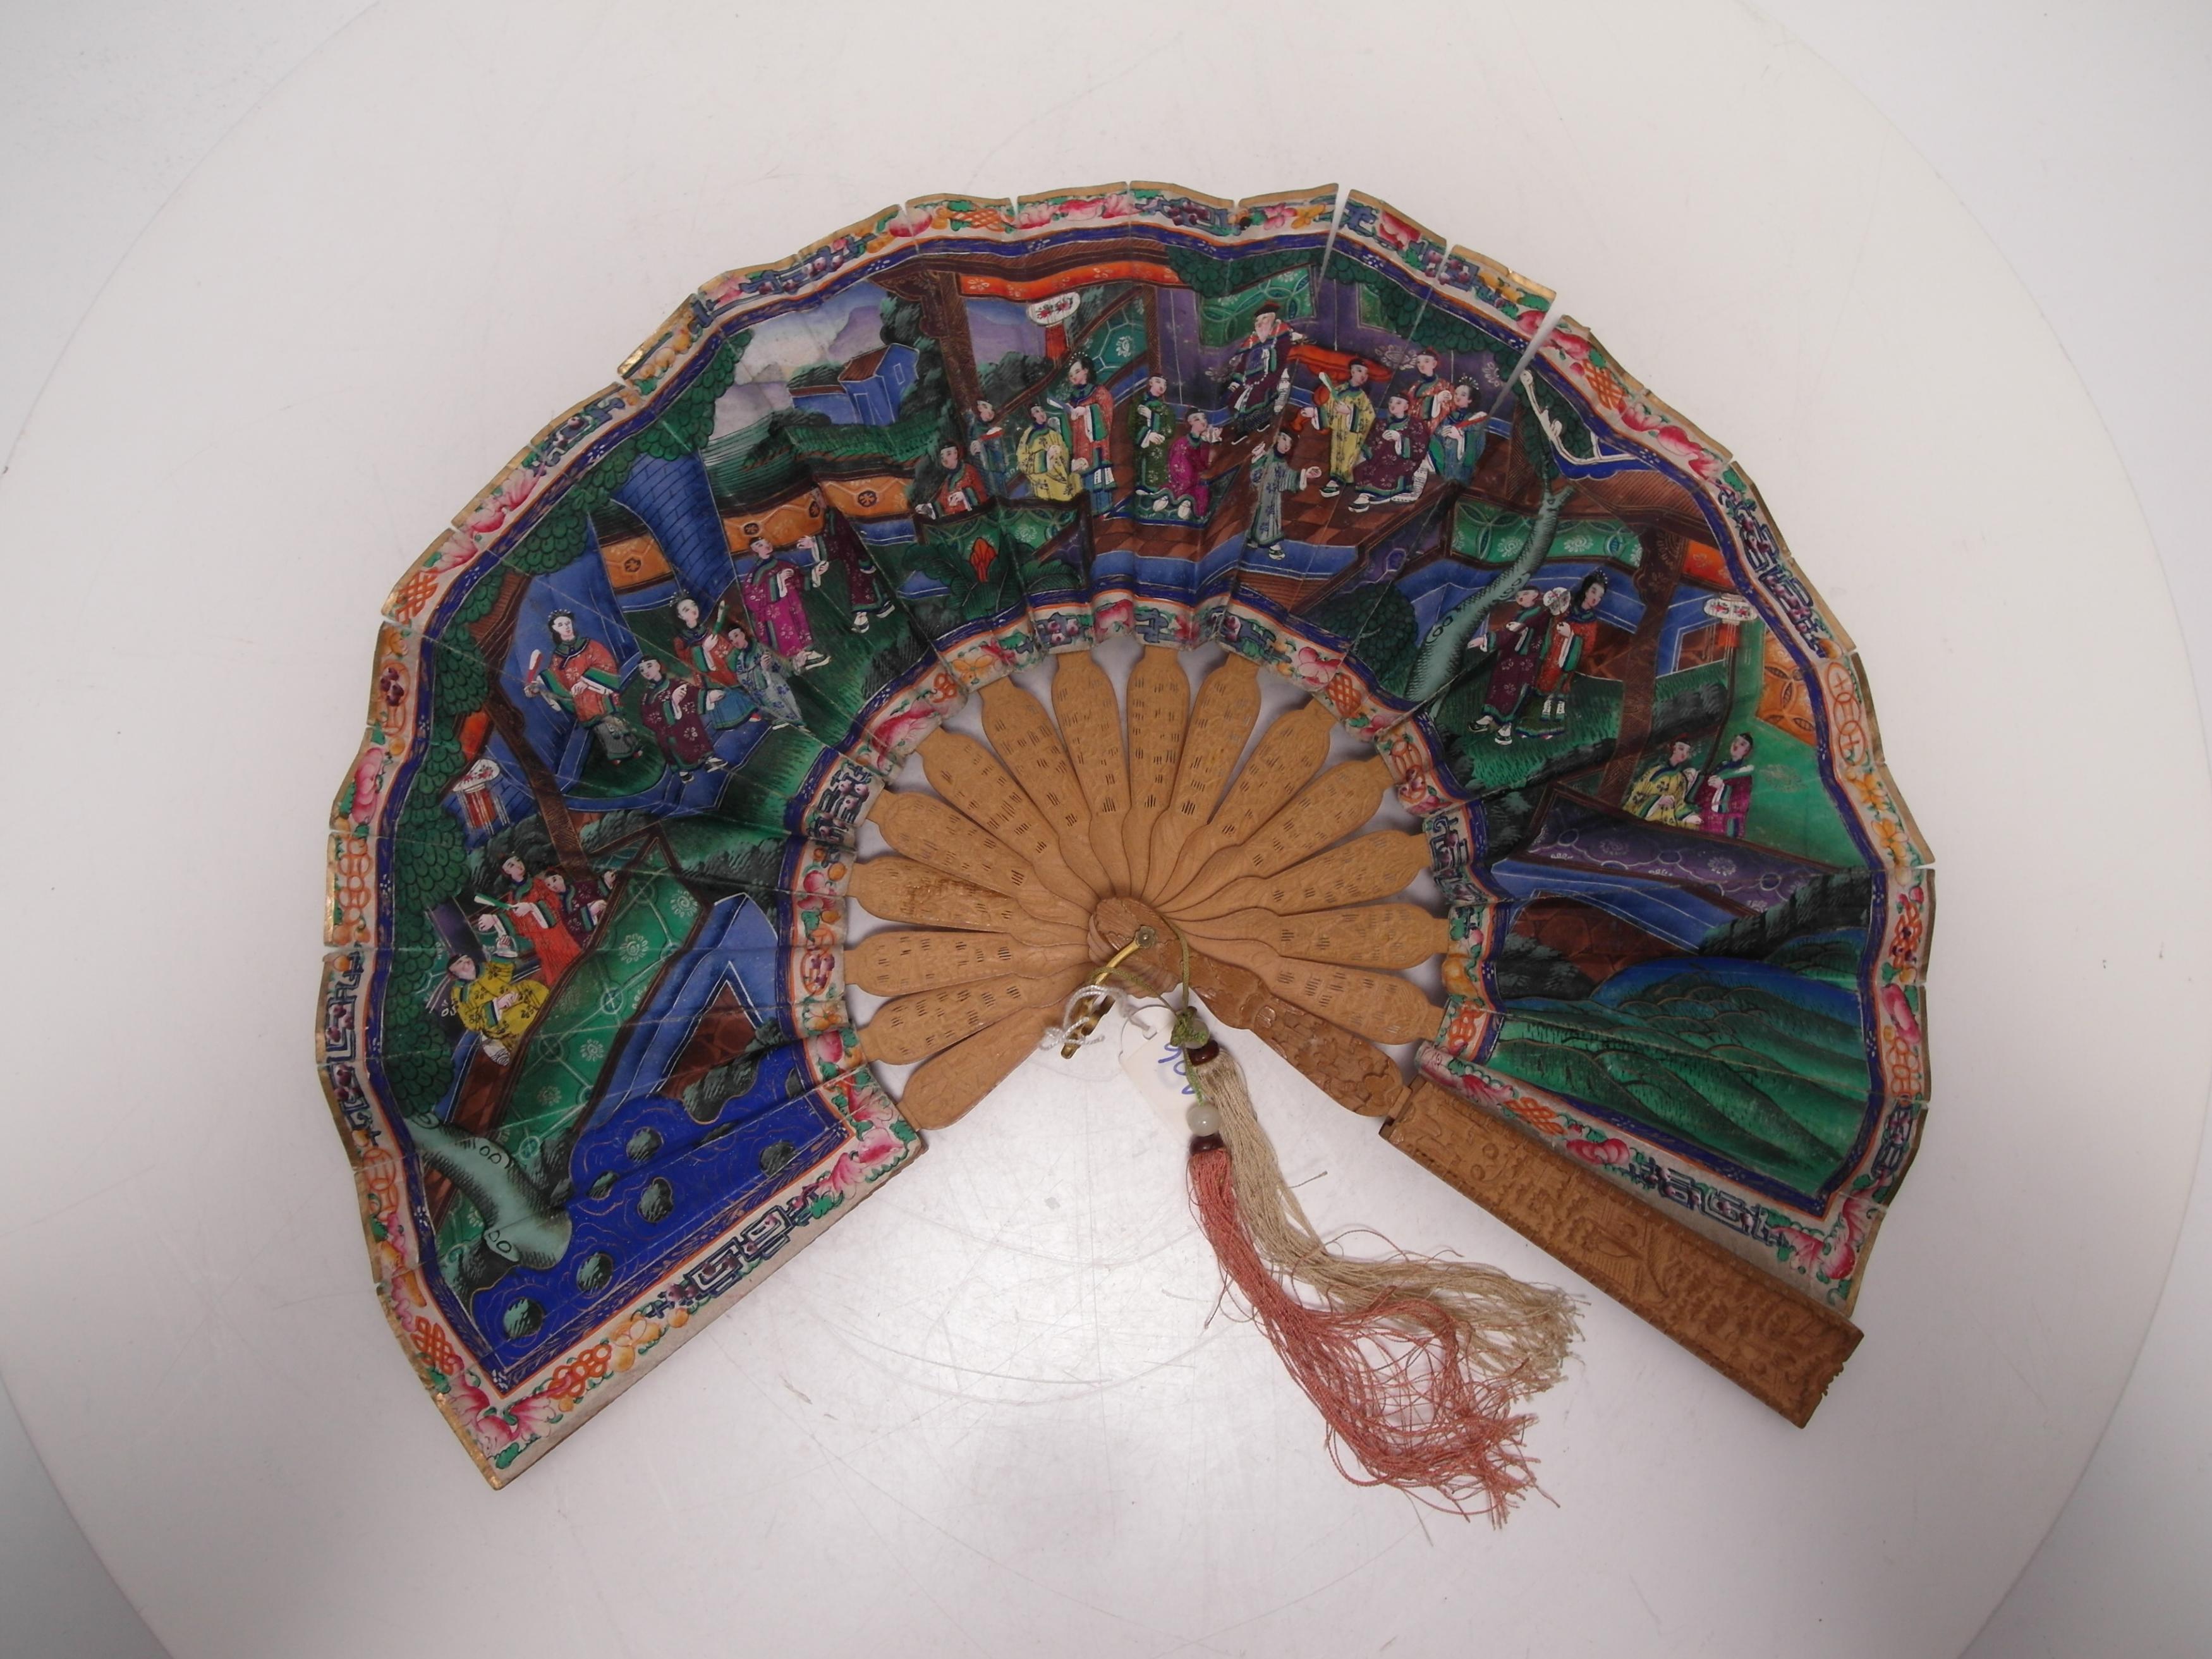 TWO FANS WITH GENRE SCENES, LANDSCAPES AND FLOWERS. Origin: China. Dynasty: Qing dynasty. Date: - Image 5 of 11